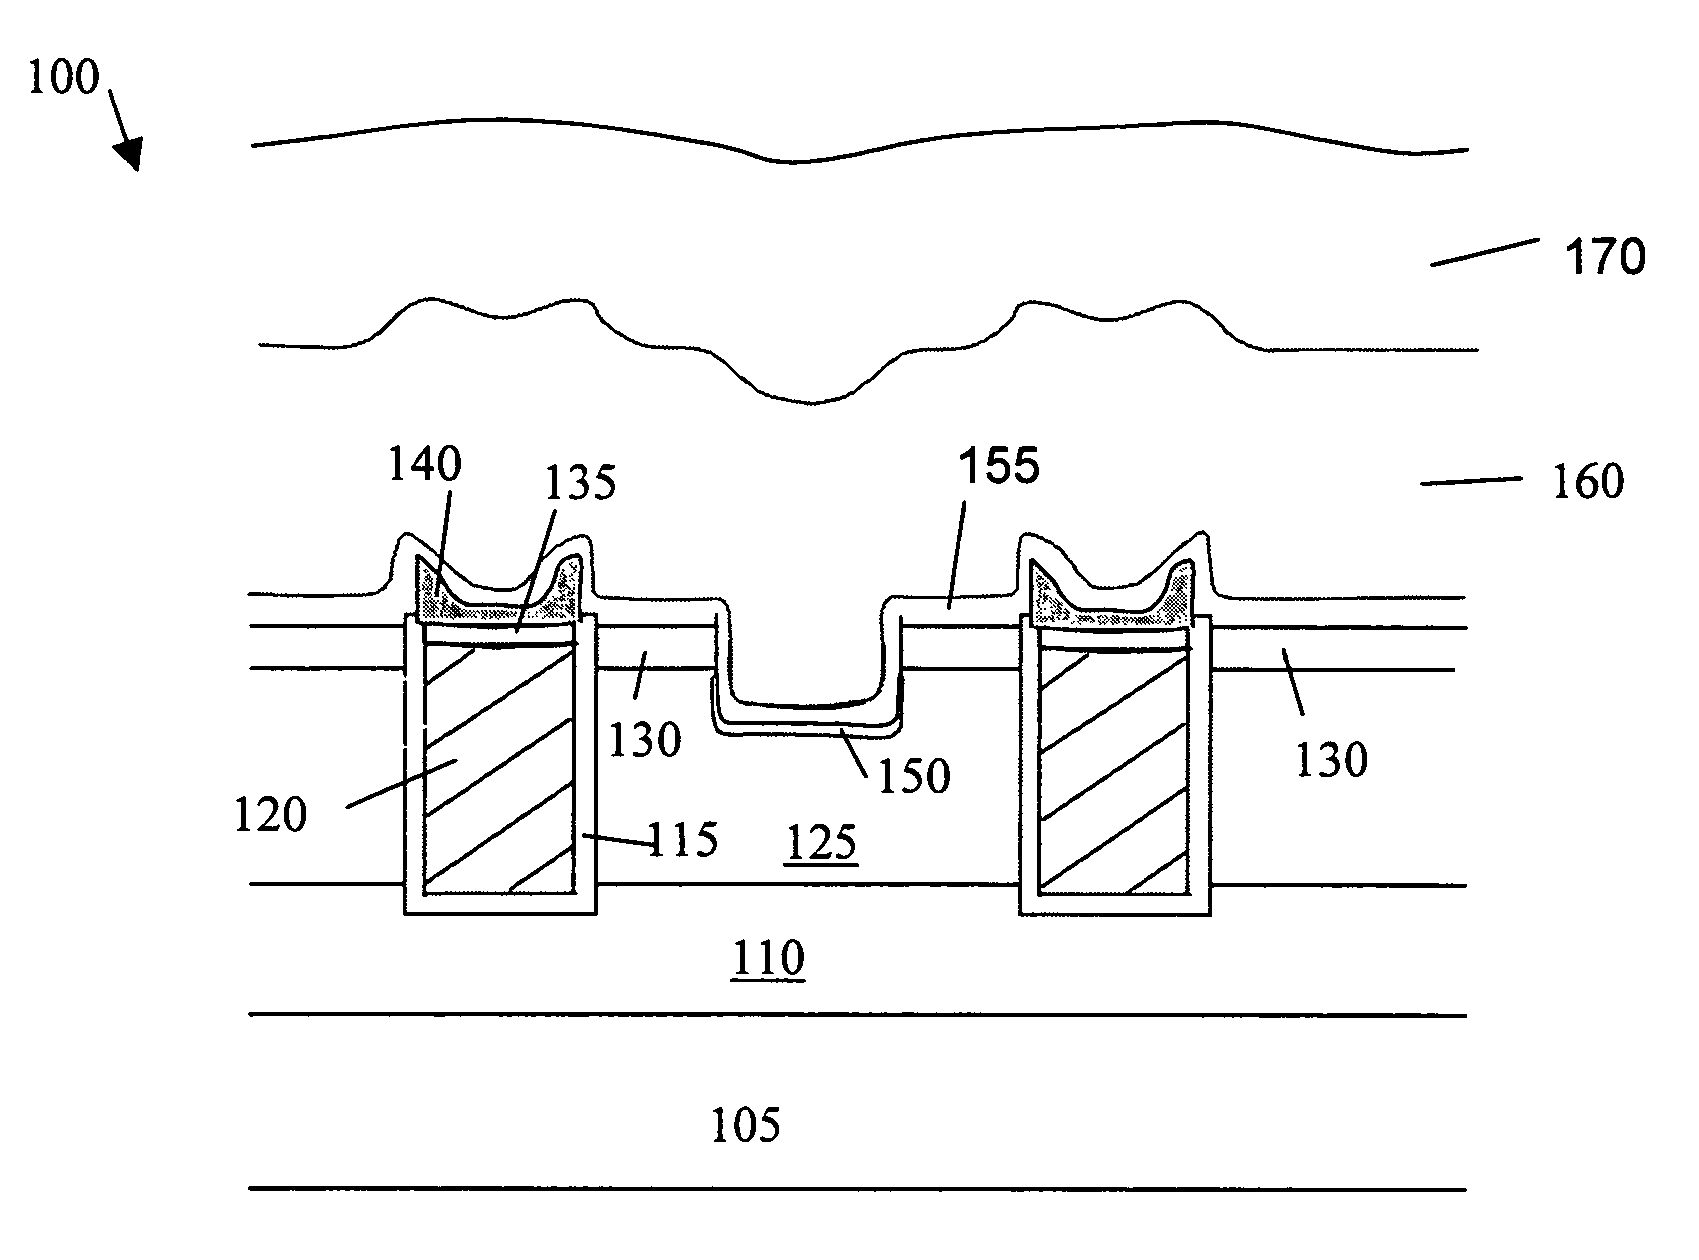 Device configuration of asymmetrical DMOSFET with schottky barrier source